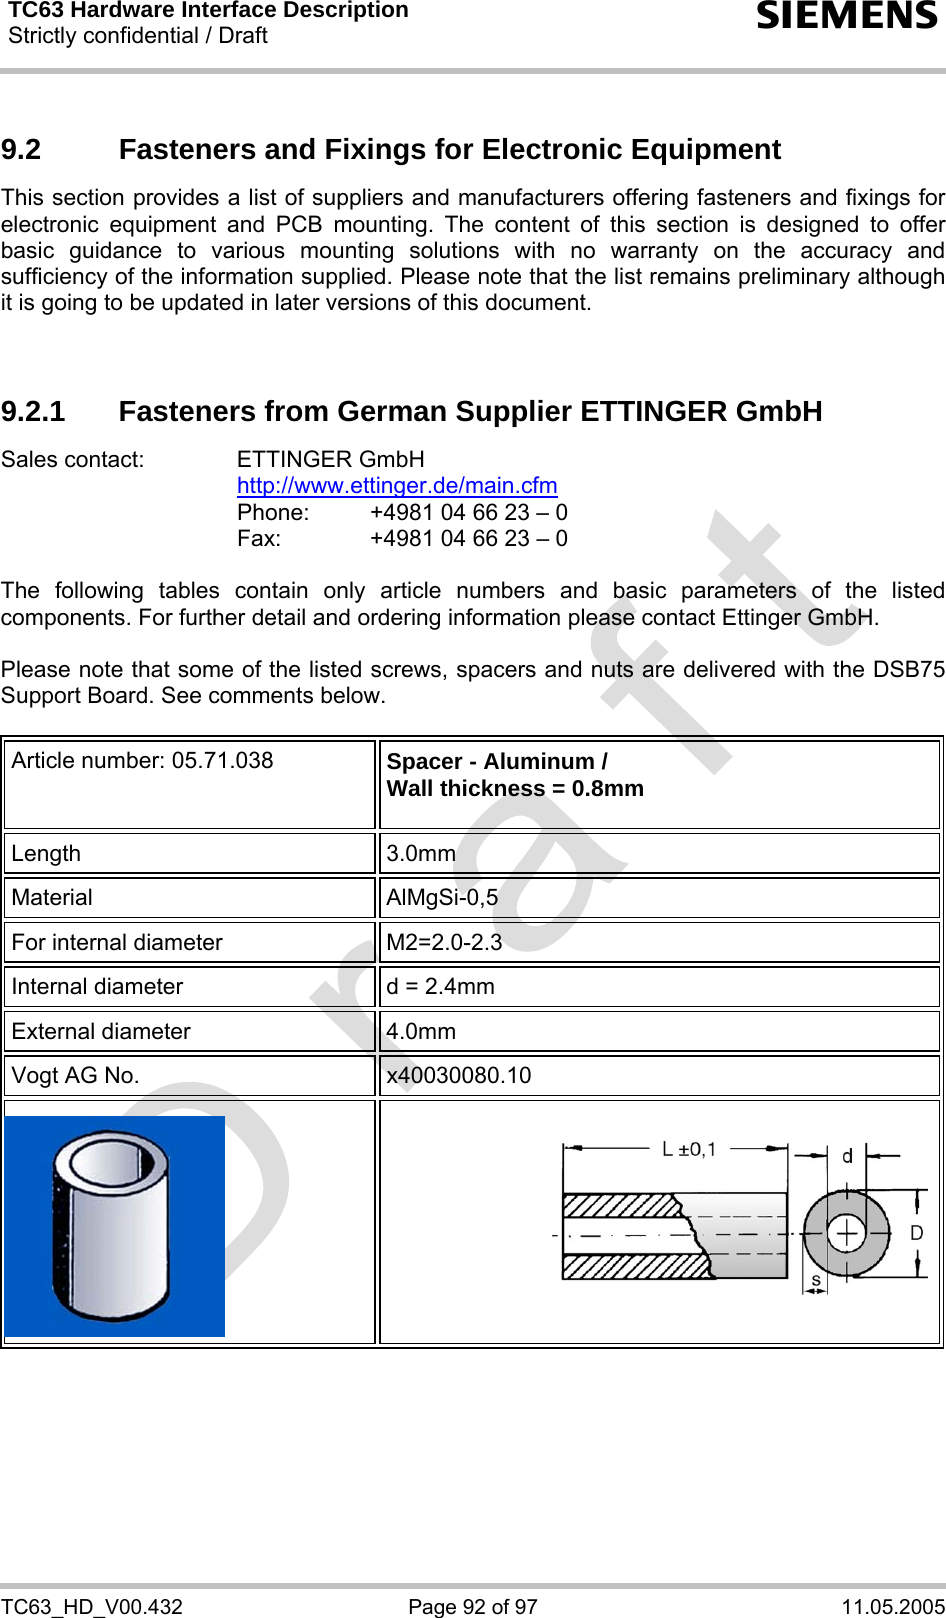 TC63 Hardware Interface Description Strictly confidential / Draft  s TC63_HD_V00.432  Page 92 of 97  11.05.2005 9.2  Fasteners and Fixings for Electronic Equipment This section provides a list of suppliers and manufacturers offering fasteners and fixings for electronic equipment and PCB mounting. The content of this section is designed to offer basic guidance to various mounting solutions with no warranty on the accuracy and sufficiency of the information supplied. Please note that the list remains preliminary although it is going to be updated in later versions of this document.   9.2.1  Fasteners from German Supplier ETTINGER GmbH Sales contact:  ETTINGER GmbH  http://www.ettinger.de/main.cfm   Phone:   +4981 04 66 23 – 0   Fax:    +4981 04 66 23 – 0  The following tables contain only article numbers and basic parameters of the listed components. For further detail and ordering information please contact Ettinger GmbH.   Please note that some of the listed screws, spacers and nuts are delivered with the DSB75 Support Board. See comments below.  Article number: 05.71.038  Spacer - Aluminum / Wall thickness = 0.8mm  Length 3.0mm Material AlMgSi-0,5 For internal diameter  M2=2.0-2.3  Internal diameter  d = 2.4mm External diameter  4.0mm Vogt AG No.  x40030080.10      